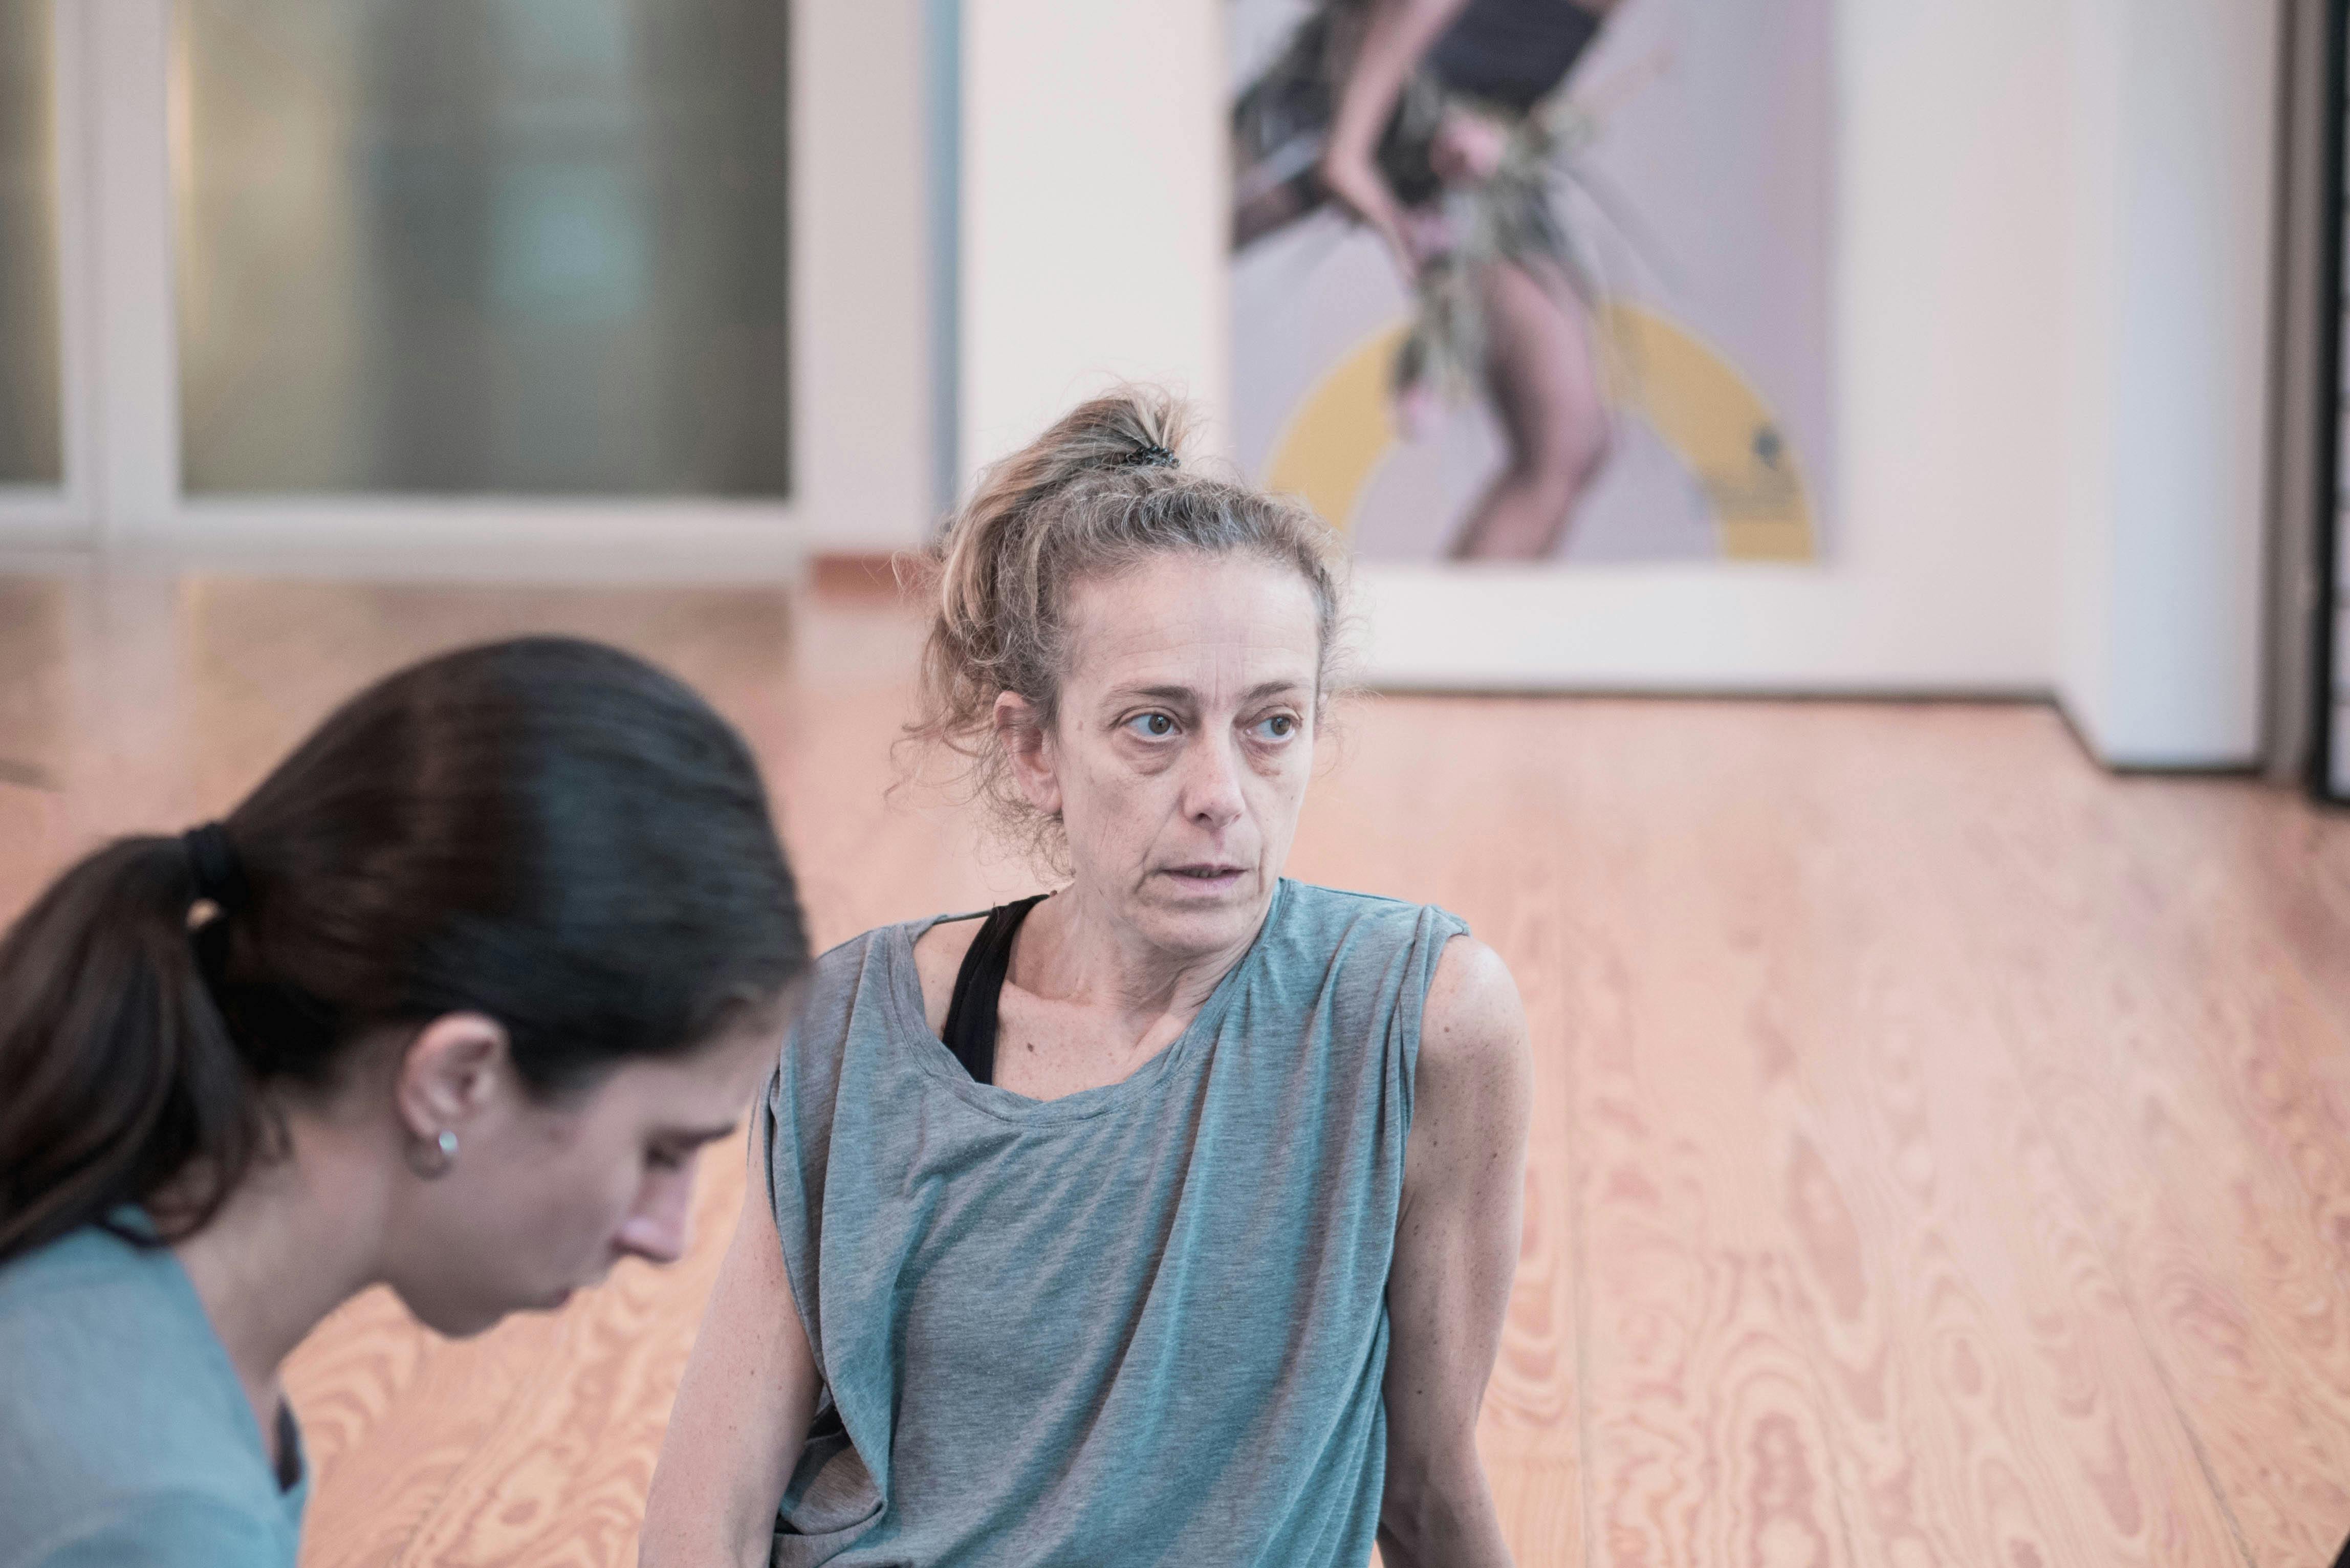 Choreographer Cristina Kristal Rizzo at work in the Studio talking with the dancers. Next to her a dancer listens.